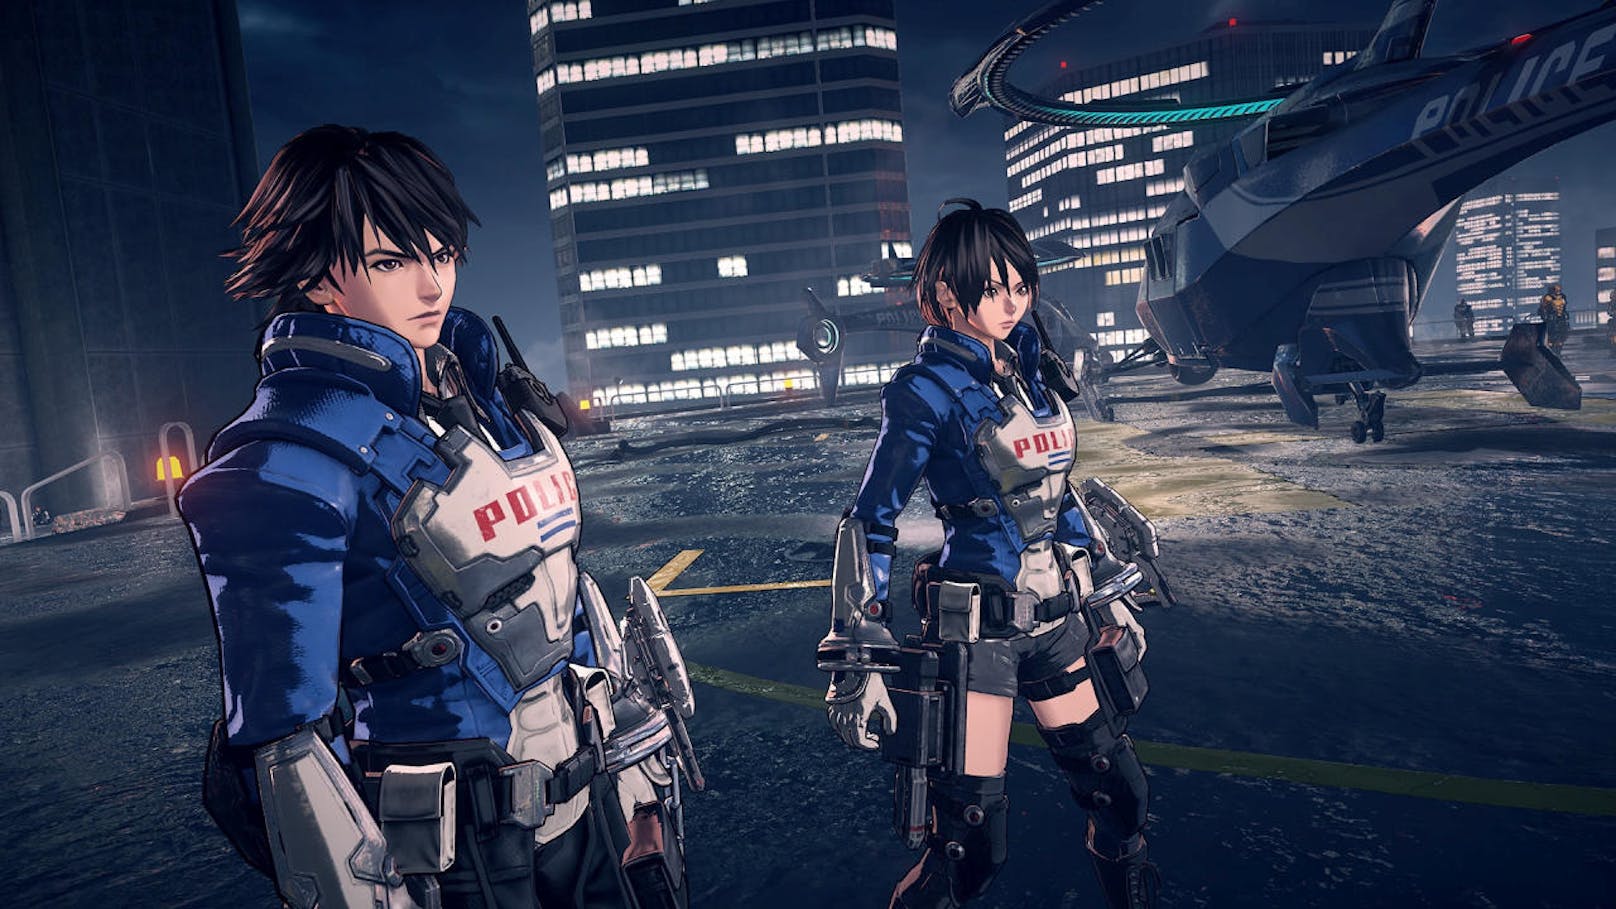  <a href="https://www.heute.at/s/astral-chain-test-review-nintendo-switch-popmusik-und-anime-40811962" target="_blank">Astral Chain</a>